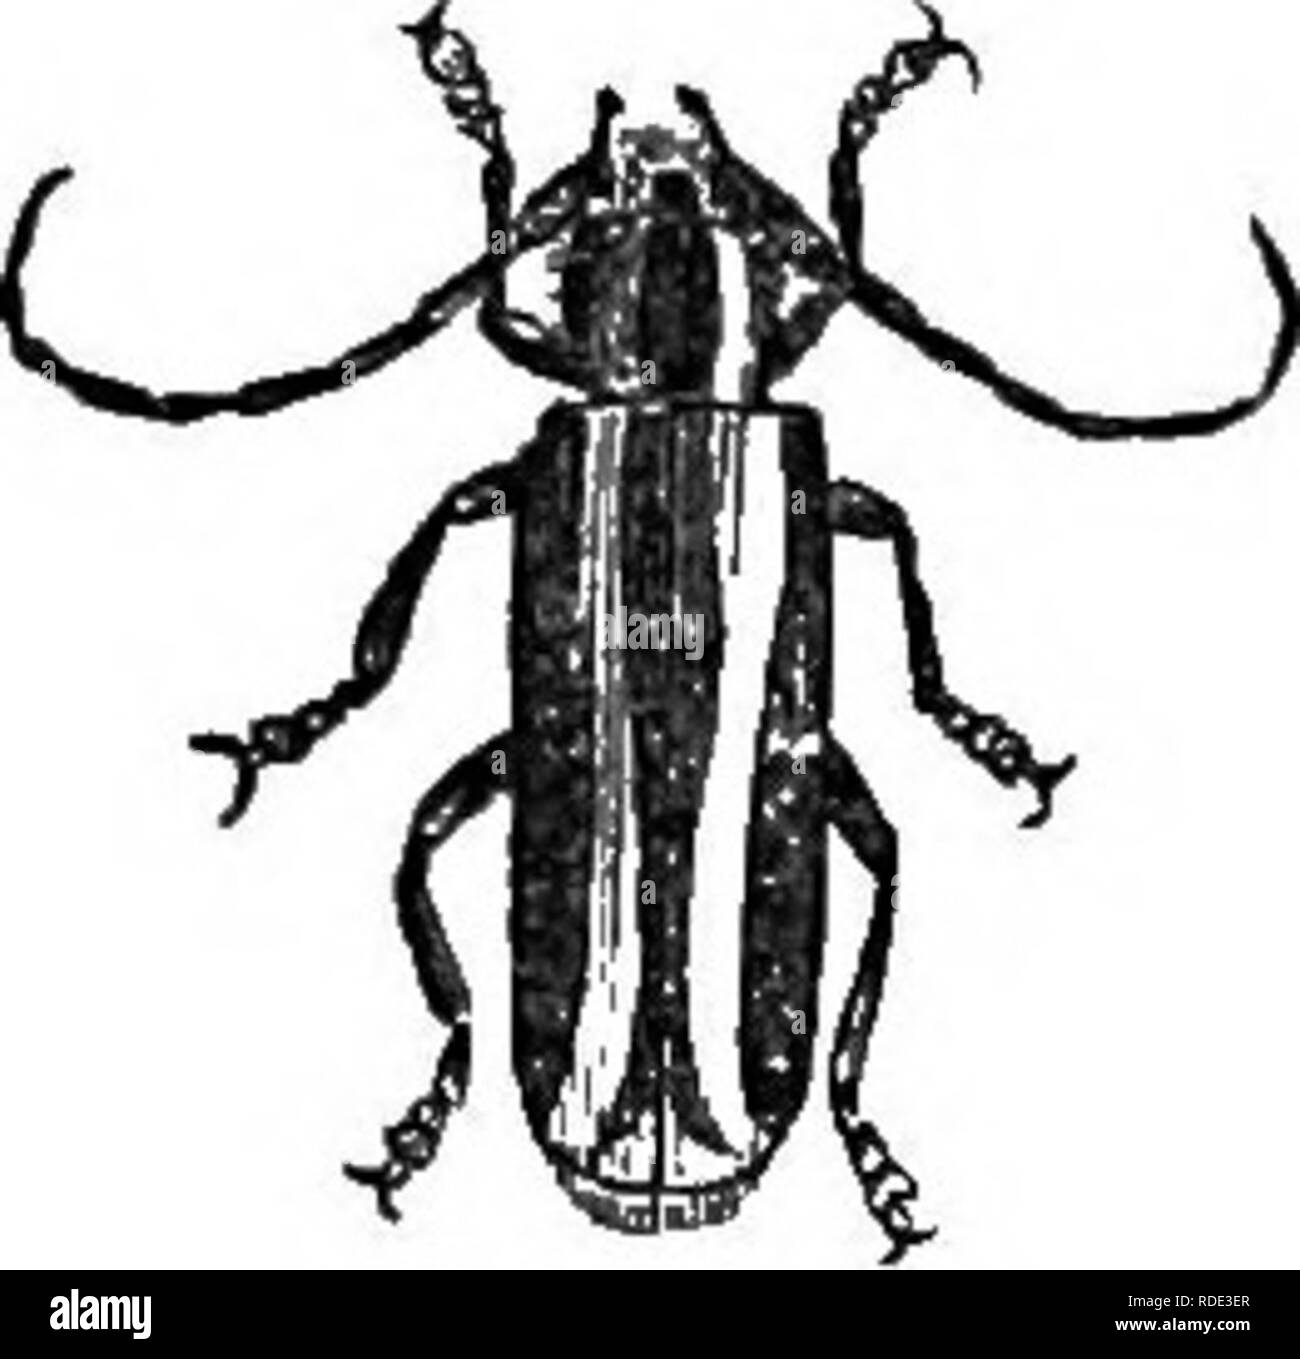 . Natural history of animals. Containing brief descriptions of the animals figured on Tenney's Natural history tablets, but complete without the tablets. Zoology. 166 AETICULATES: INSECTS. Pine Weevil, in the larva state, lives in the trunk of the pine, in which it cuts passages in various direc- tions. The Long-snouted Nut Weevil, in the larva state, lives in nuts. The Plum Weevil, when shaken from the tree, looks like a dried bud. This weevil makes a crescent-shaped wound on the surface of the plum, iu which it lays an egg; from the egg there hatches a whitish grub, which burrows into the pl Stock Photo